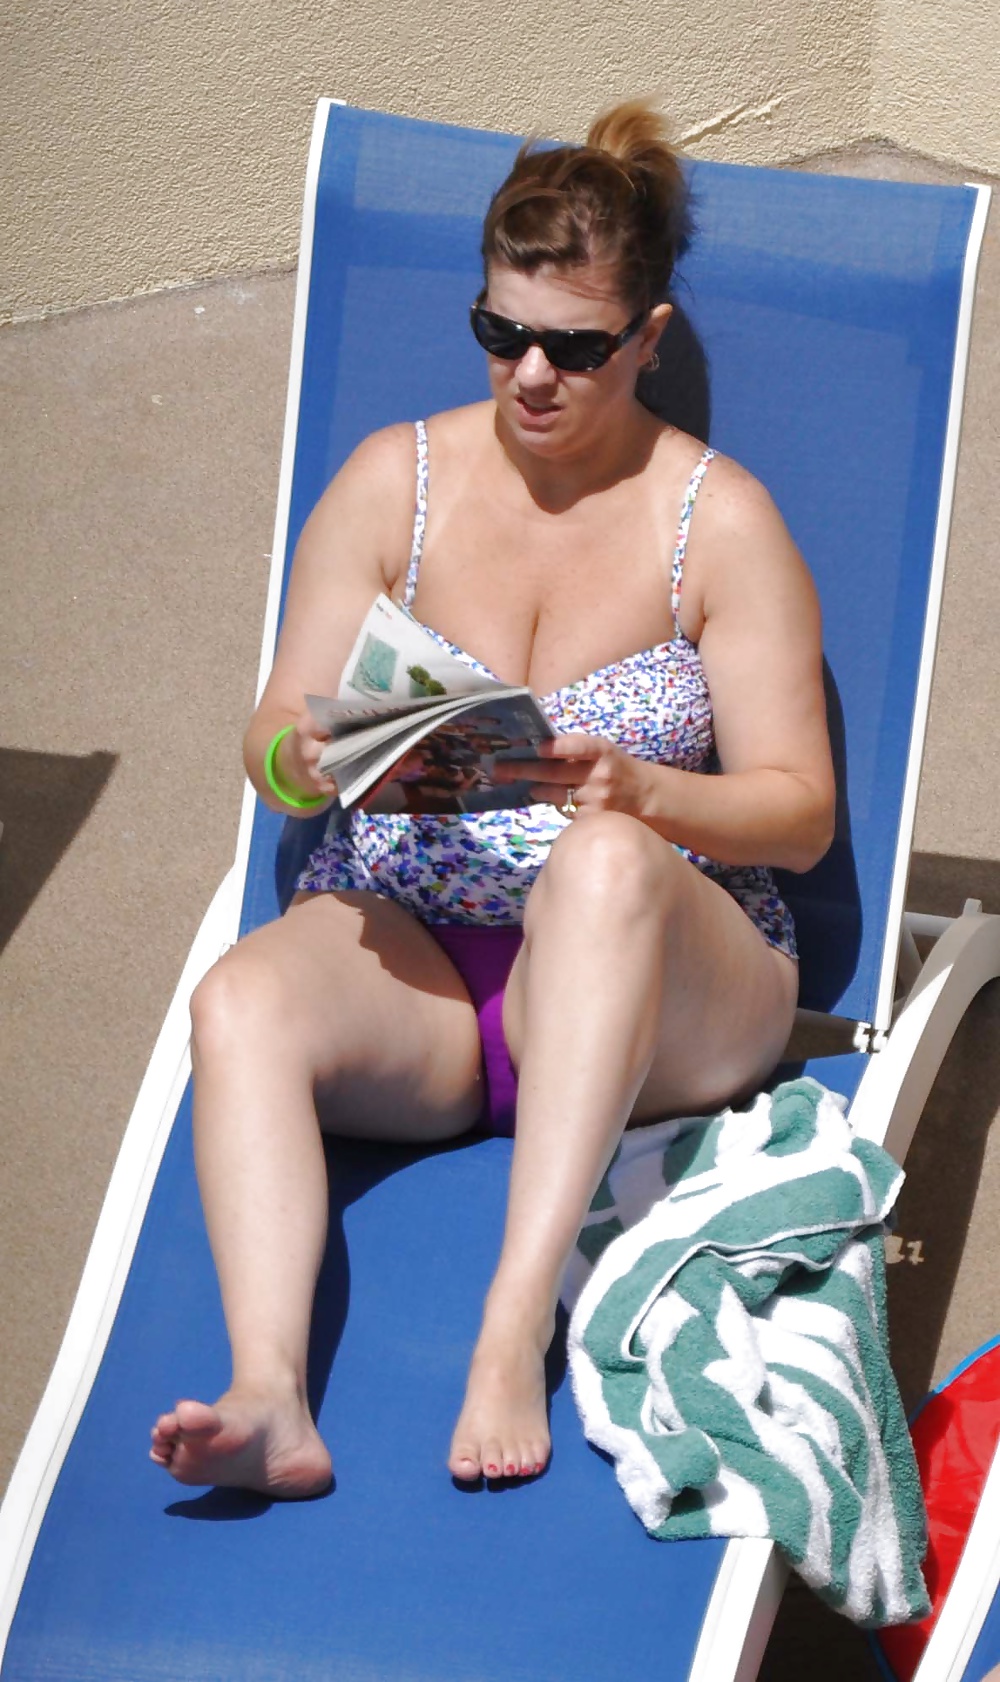 Candid MILF Mom Fat Tits Ass by Pool #39786298